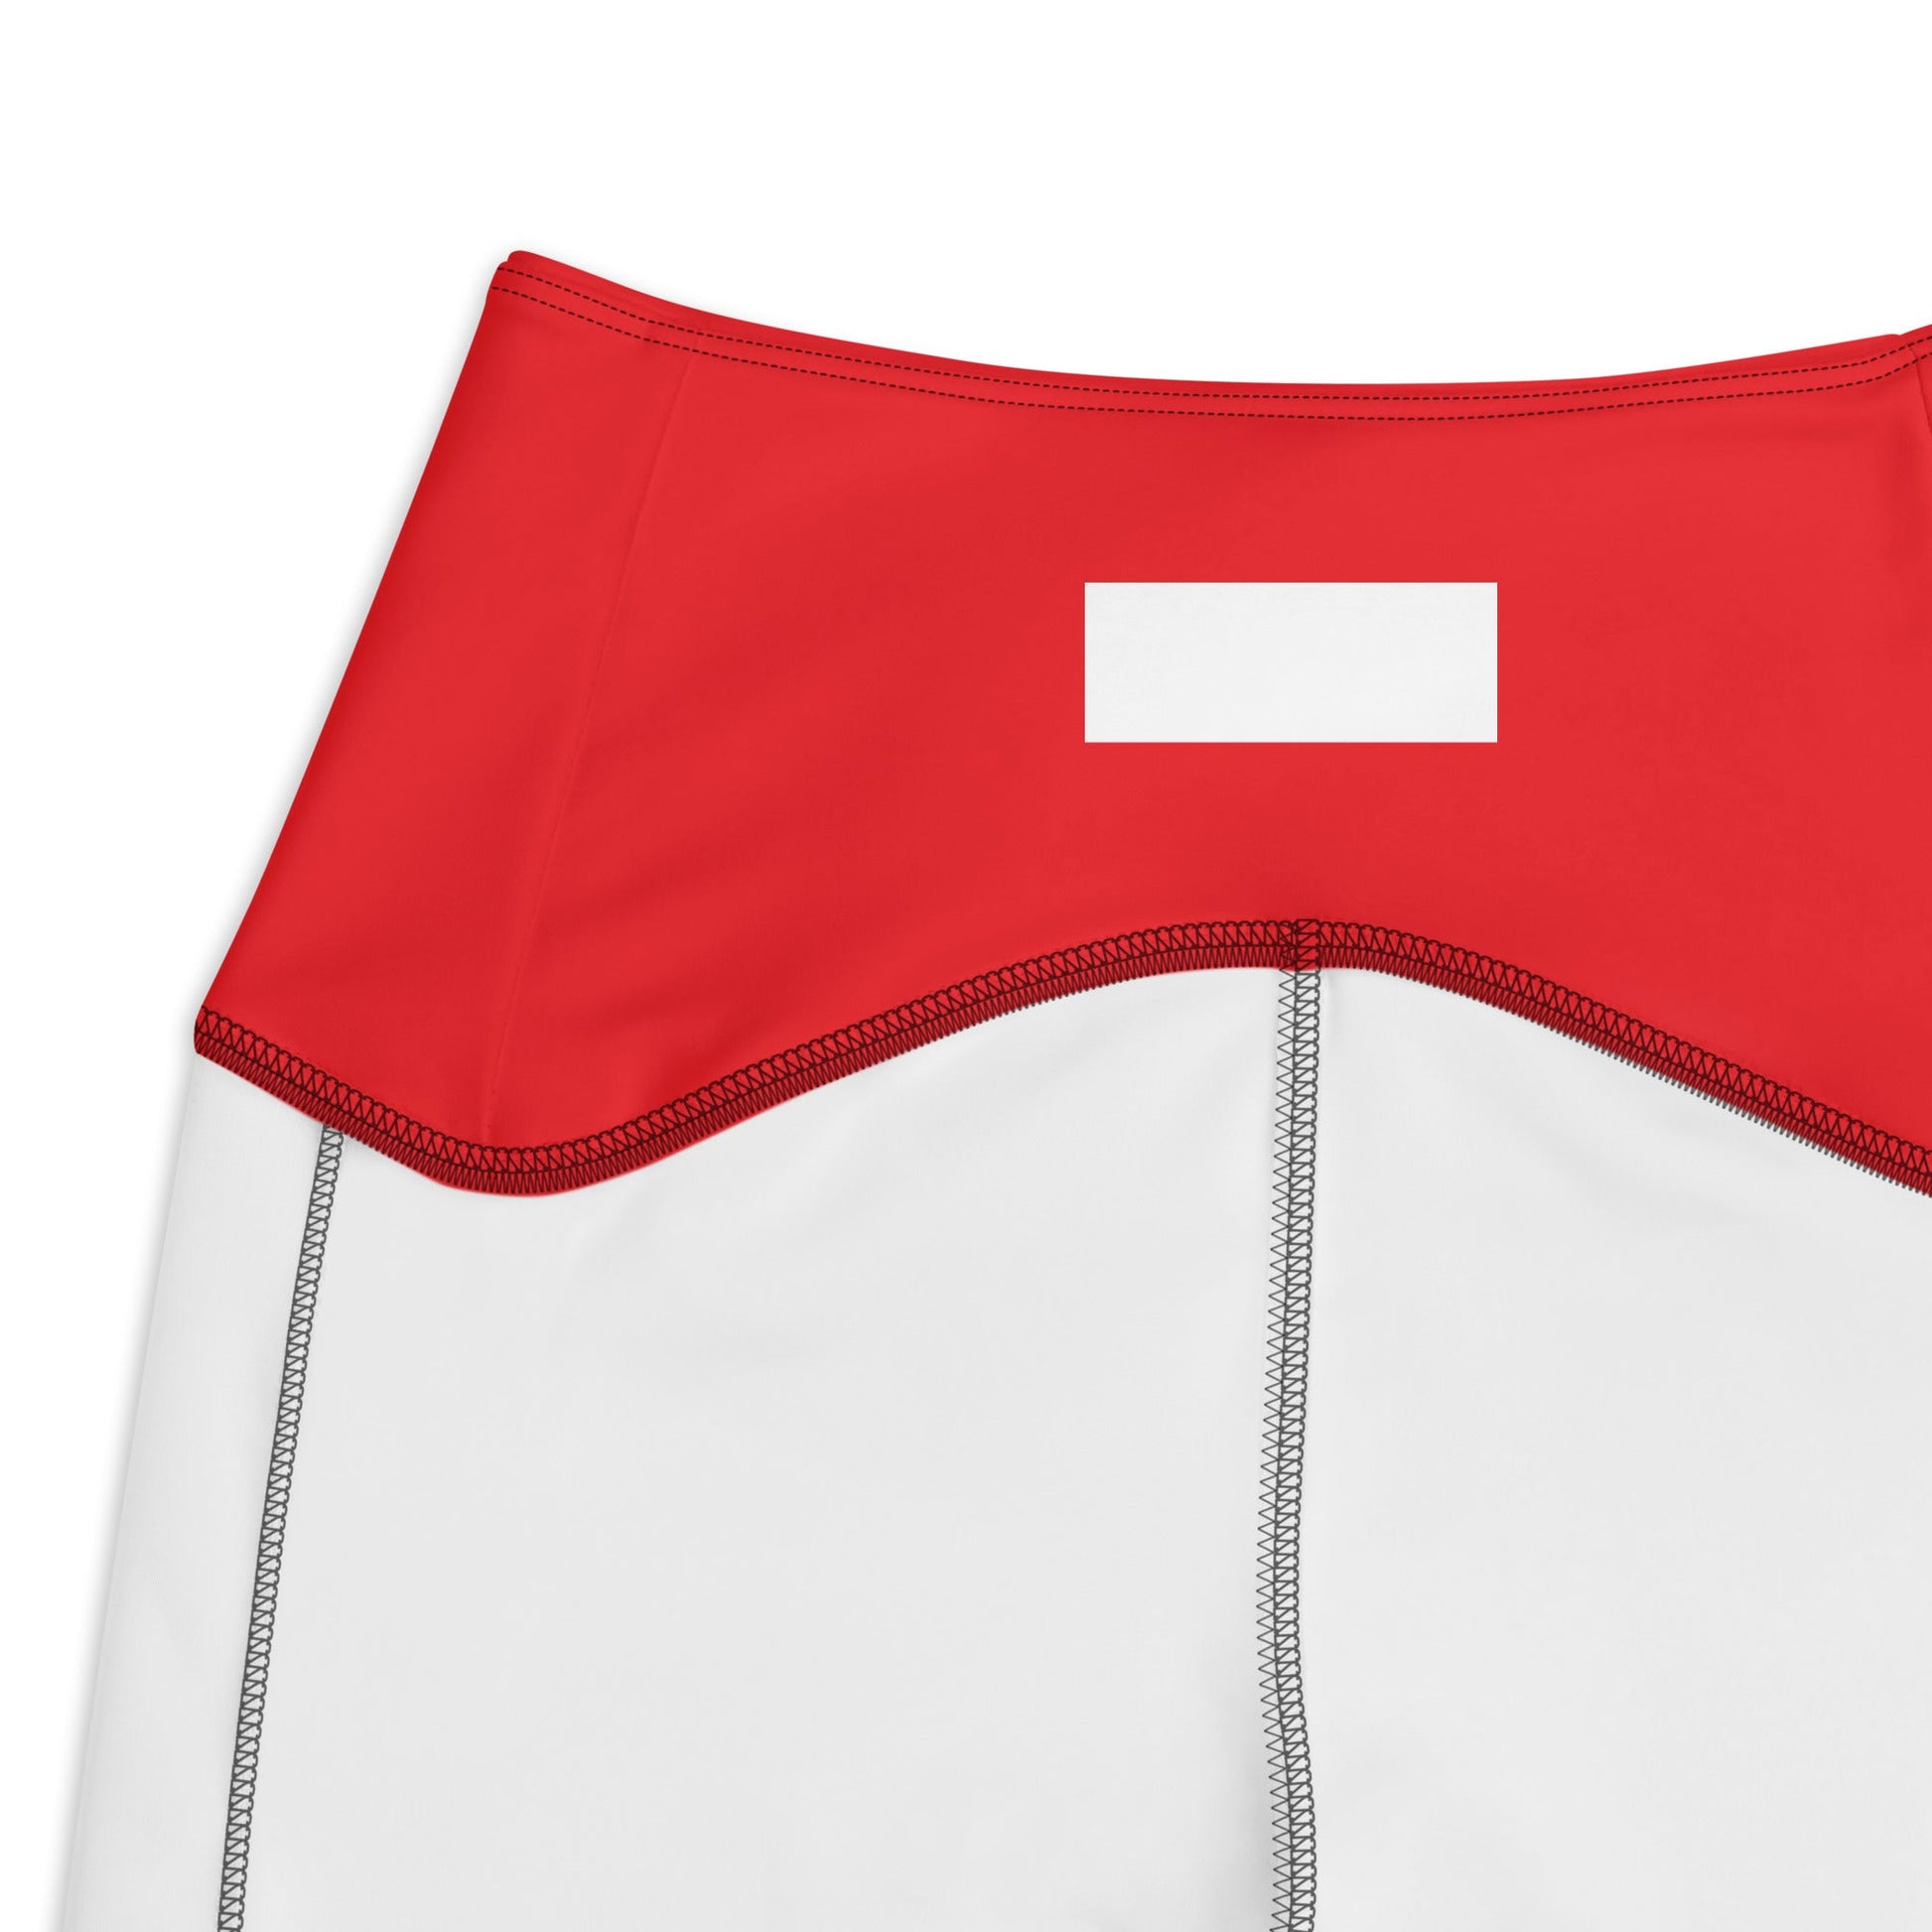 Skorched SOL Red Crossover leggings with pockets - Sun Fun Family